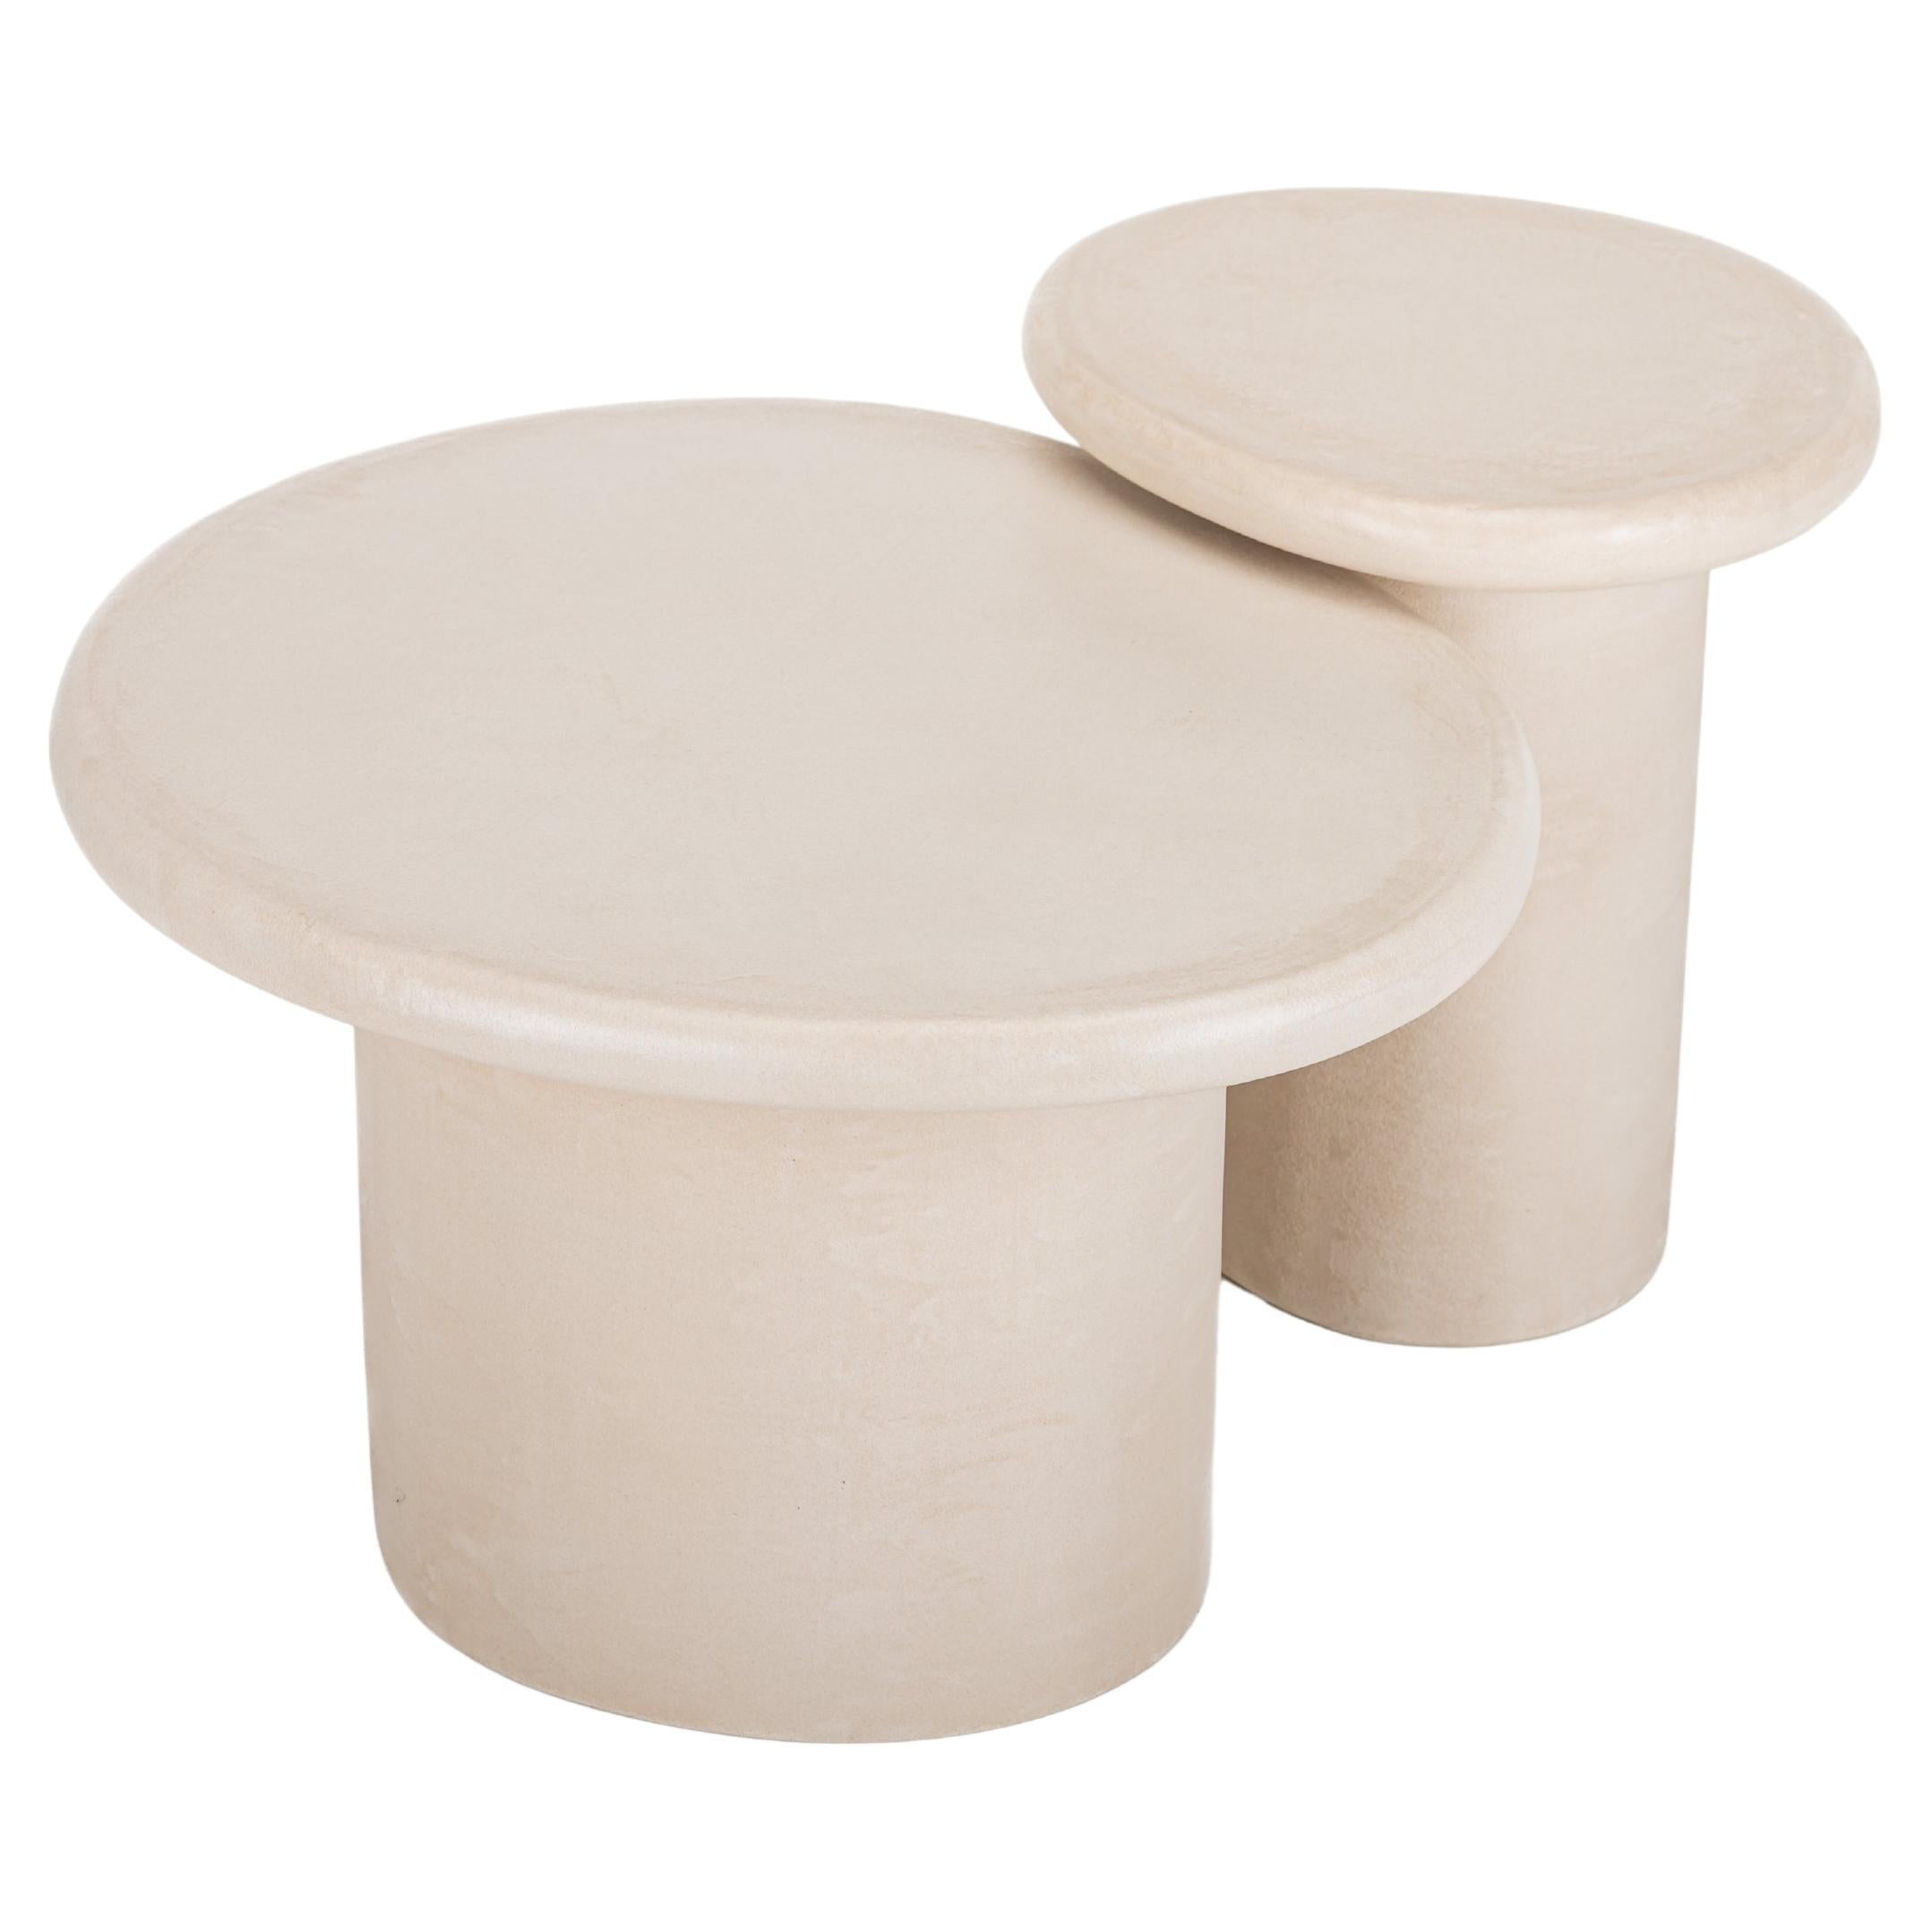 Organic Shaped Mortex Coffee Table Set "Sami" BM24 by Isabelle Beaumont